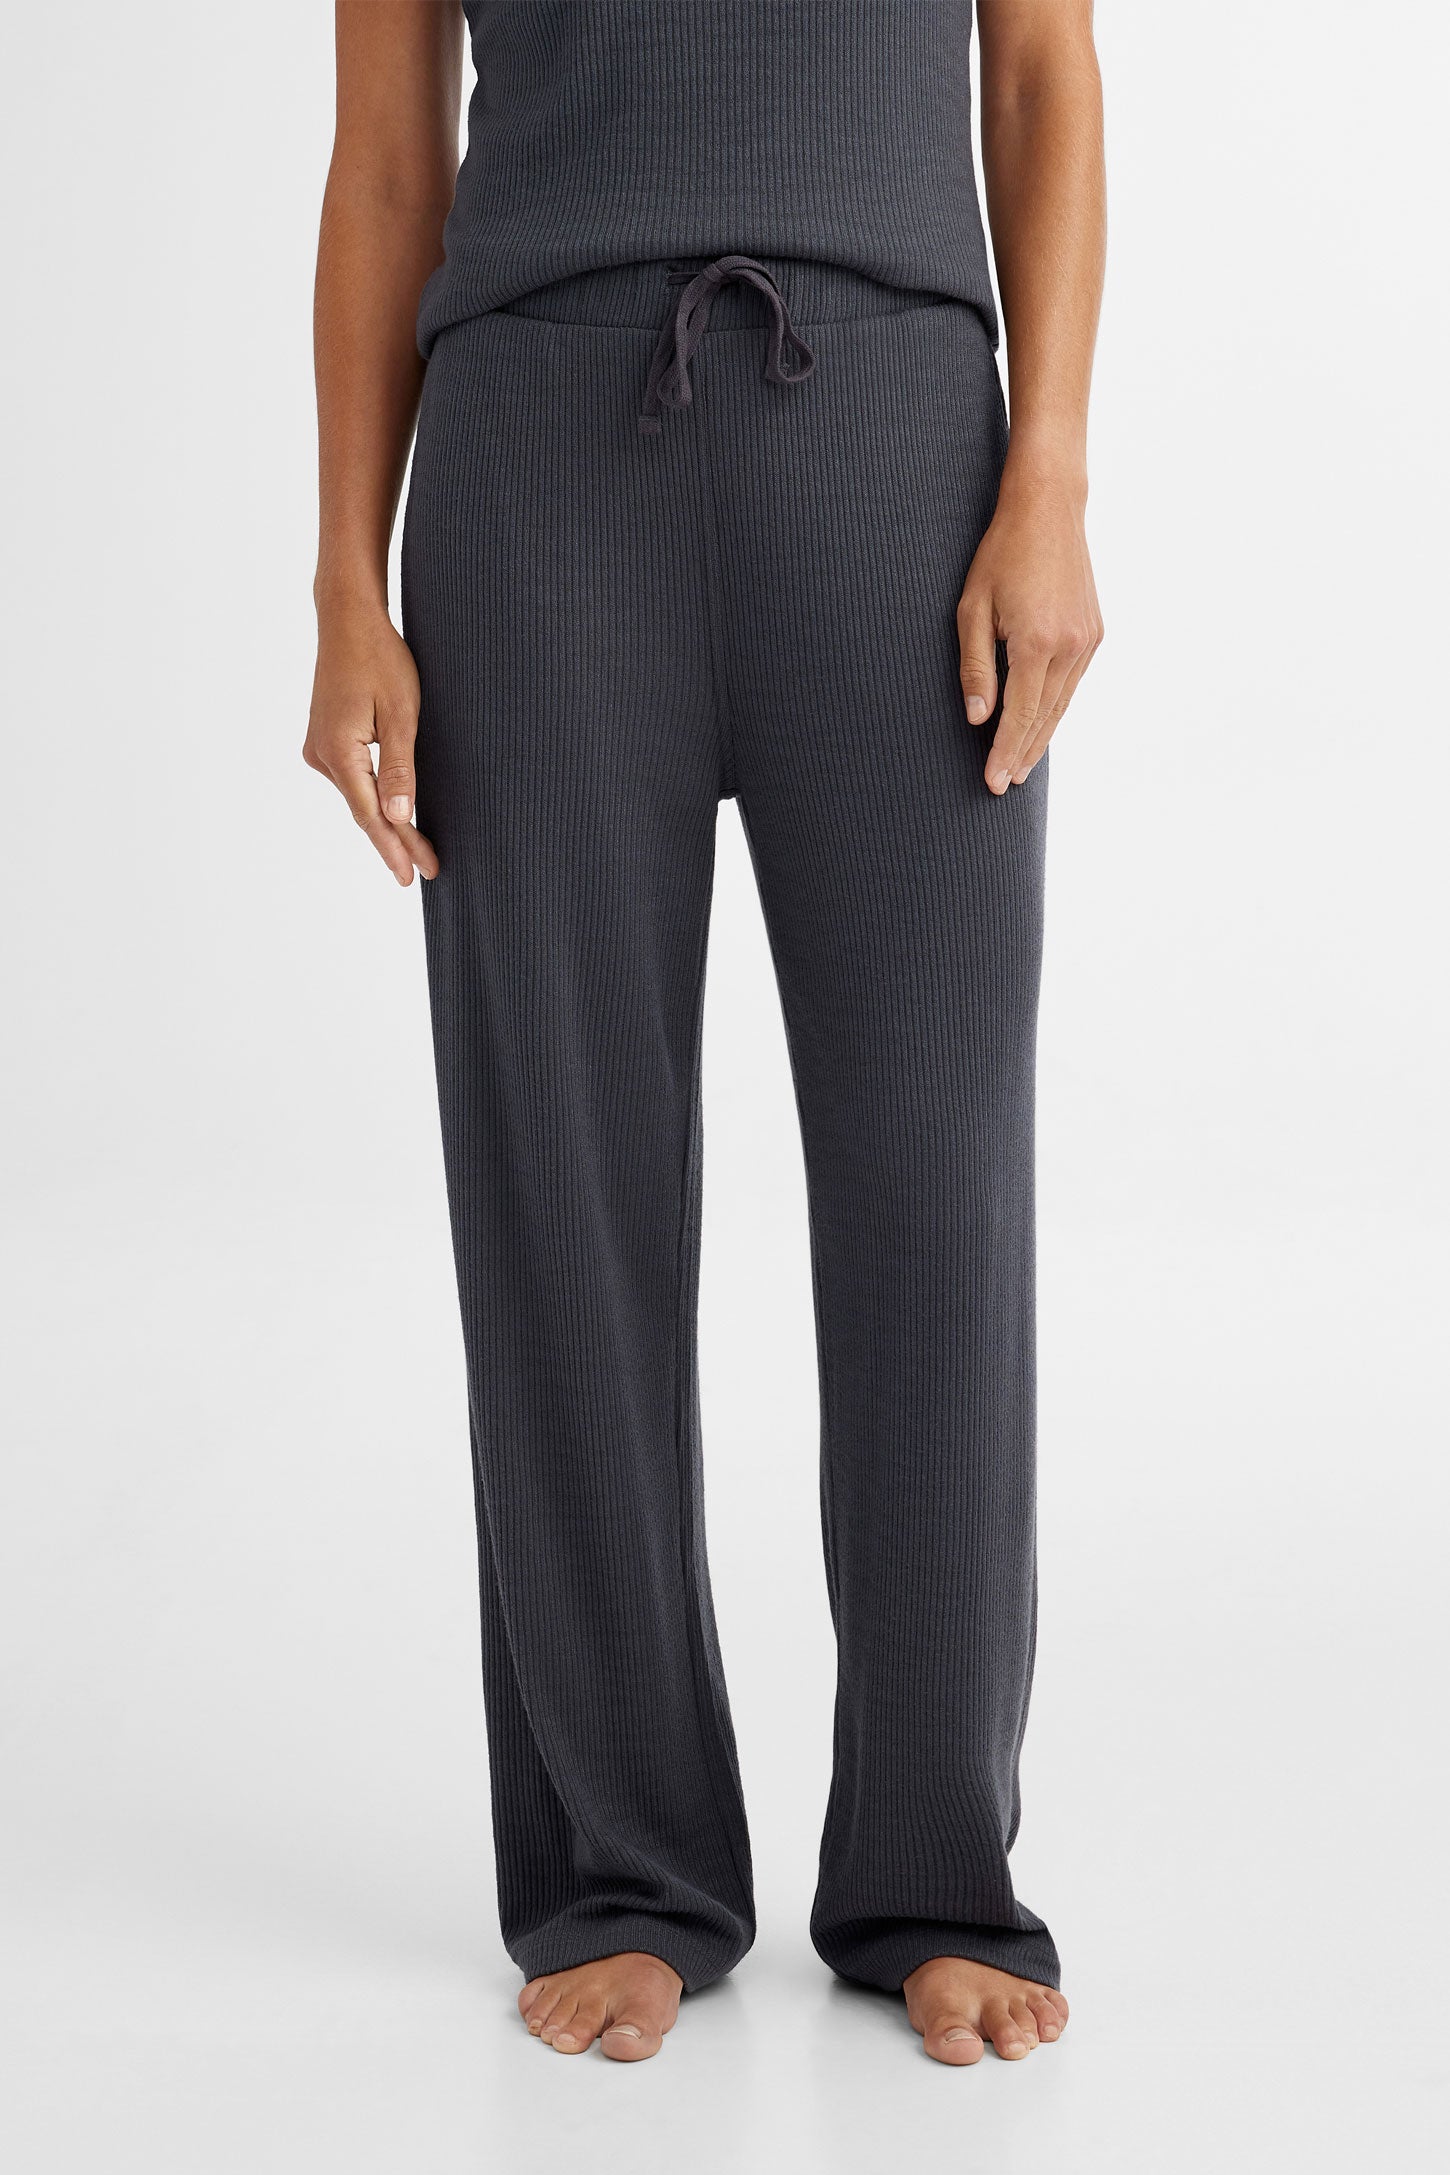 Straight Grey Pants for Women with Elastic Waistband and Zipper